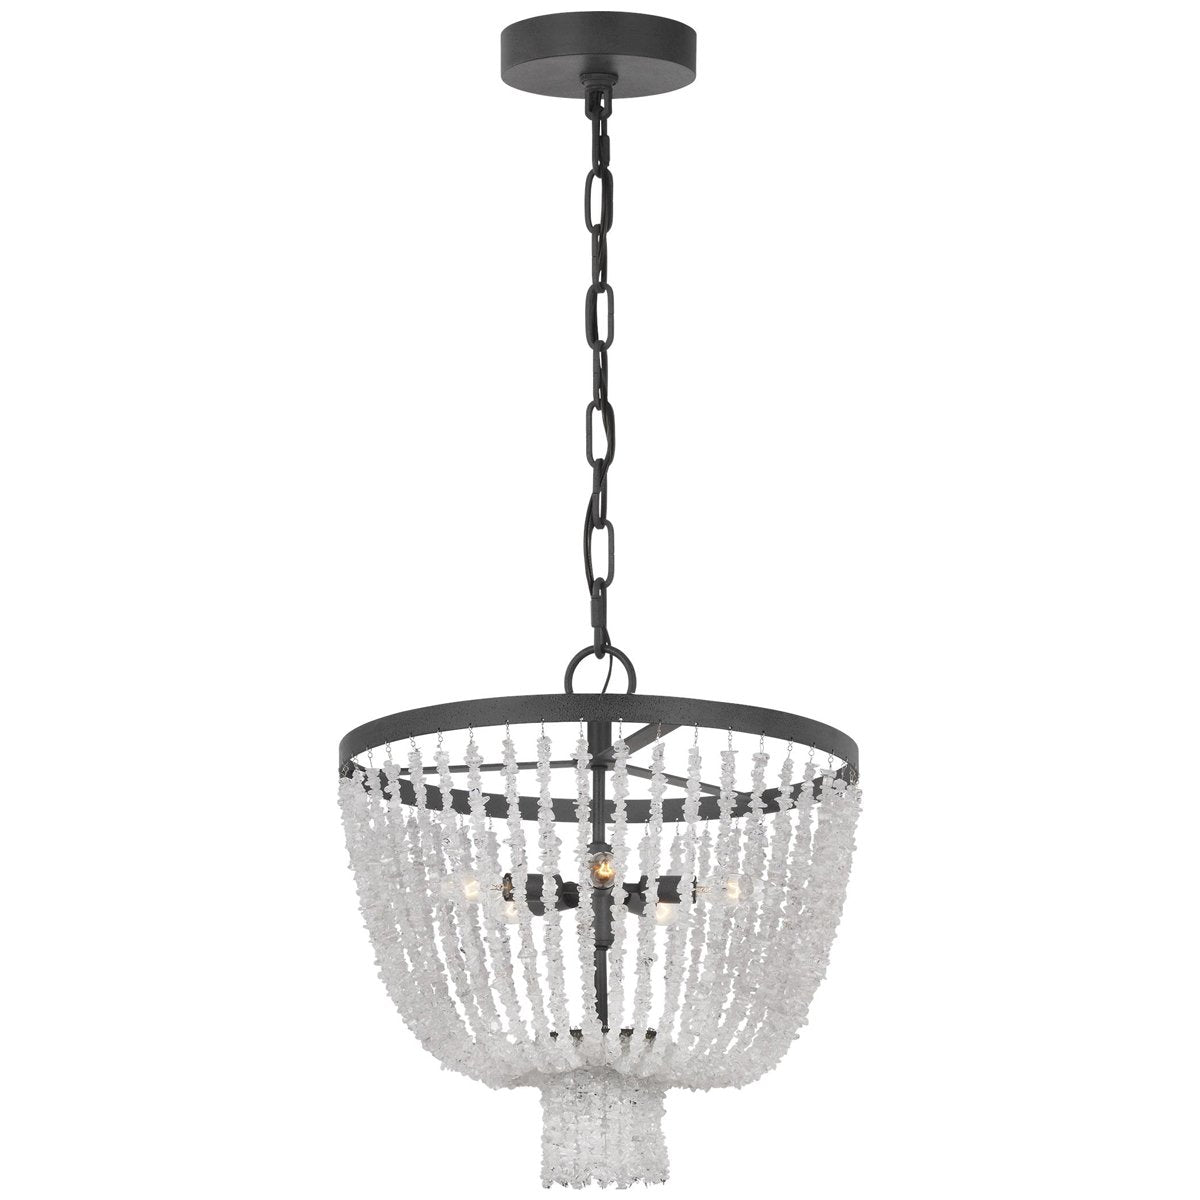 Feiss Leon Small Chandelier